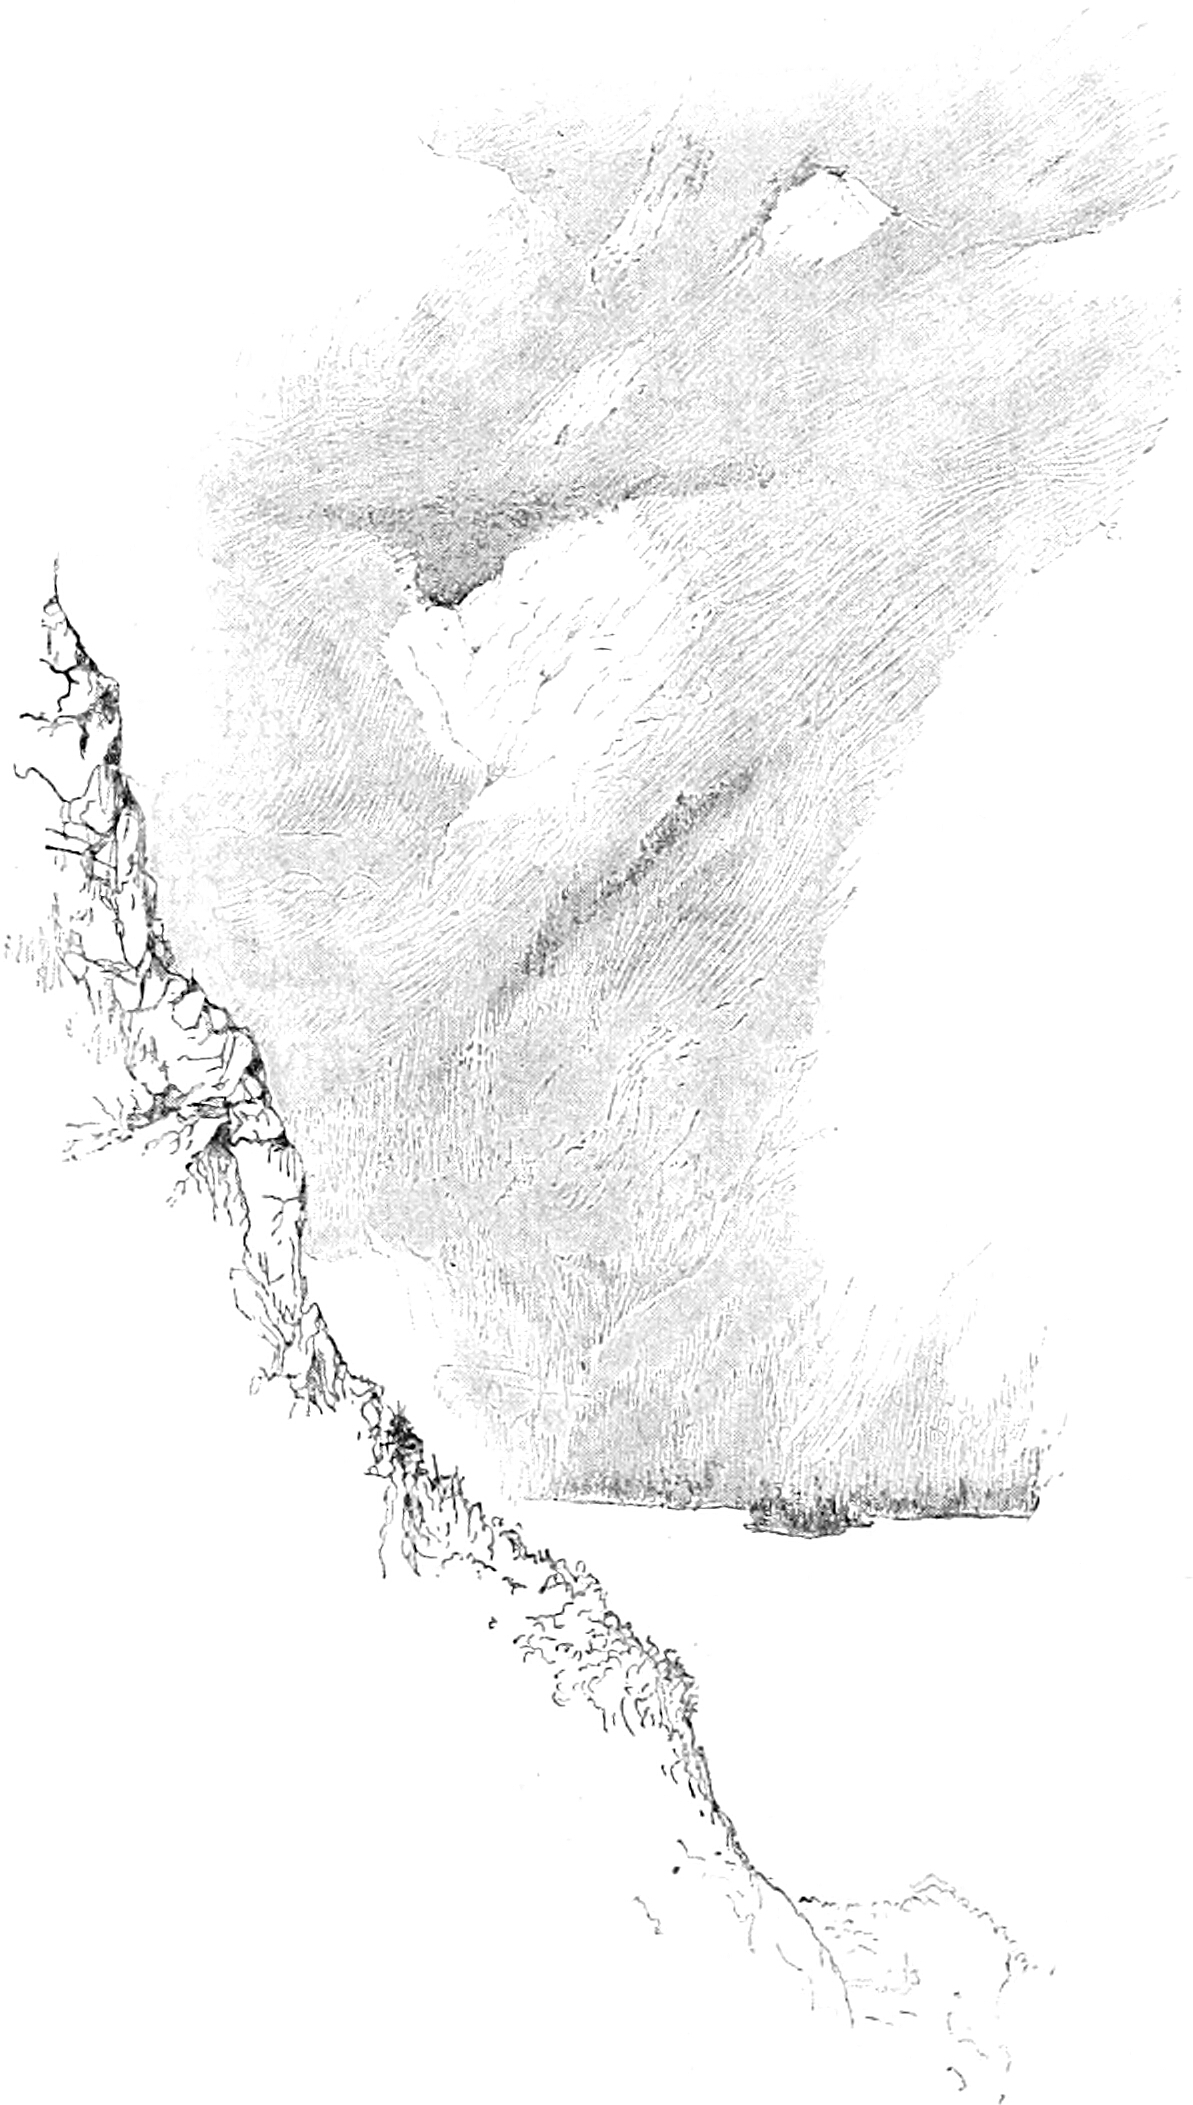 Sketch of a mountainside slope from the top left to bottom right. A lake is along the bottom, and a shaded background of more mountains is on the right side of the slope.